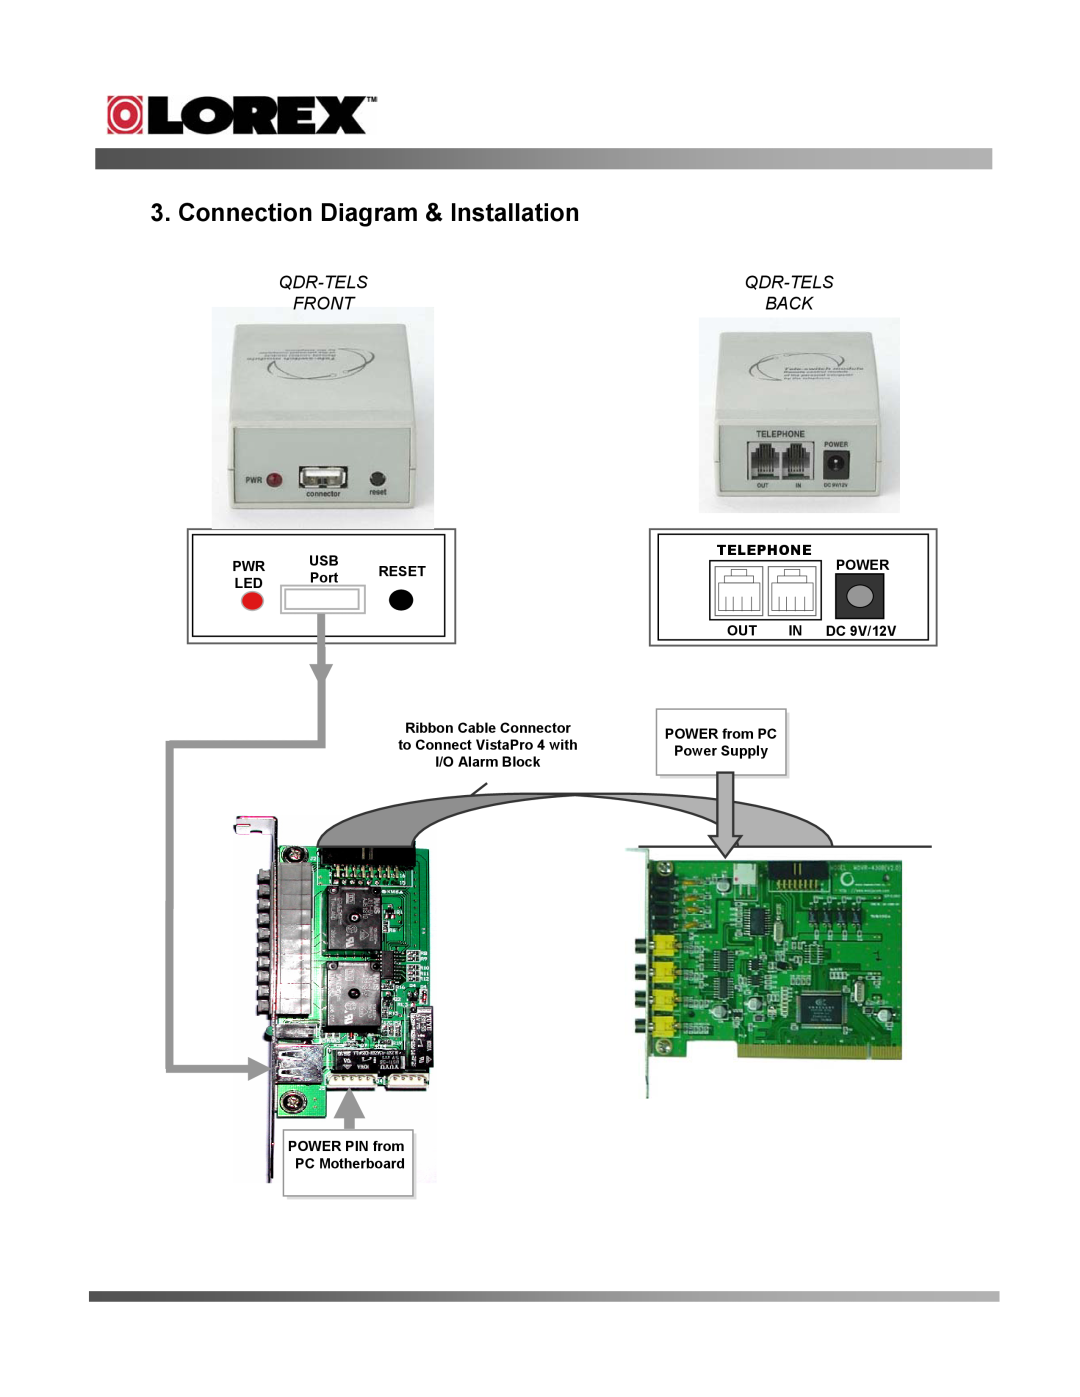 LOREX Technology QDR-TELS Connection Diagram & Installation, Qdr-Tels Front, Qdr-Tels Back, POWER from PC, Power Supply 